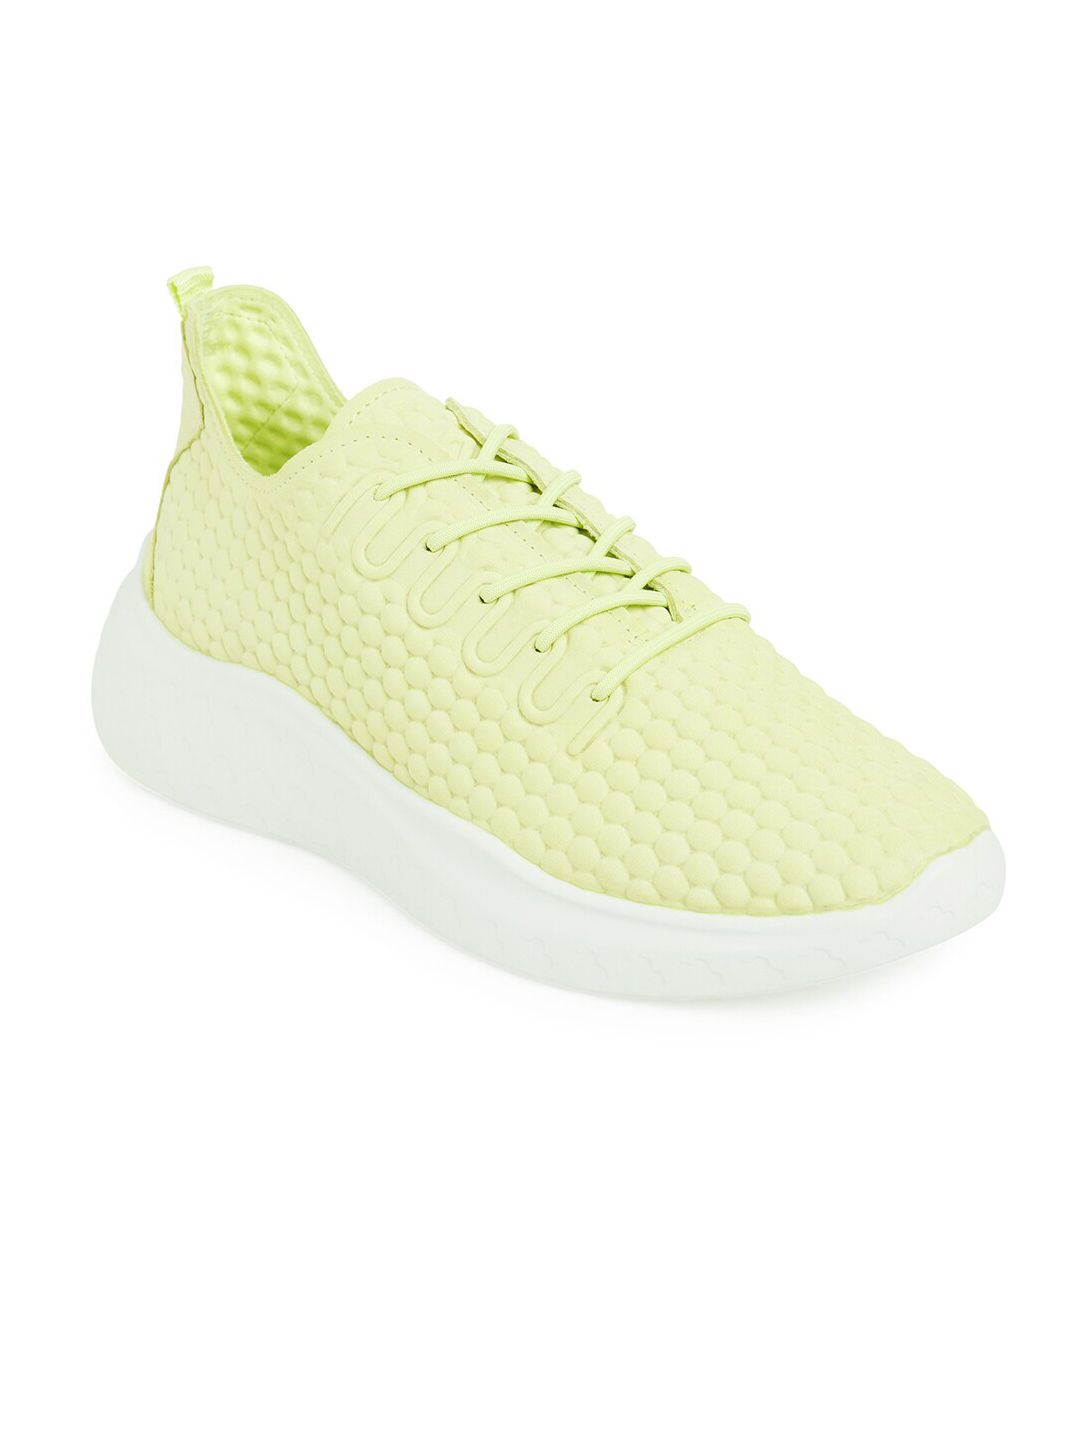 ECCO Women Green Athleisure Leather Walking Non-Marking Shoes Price in India